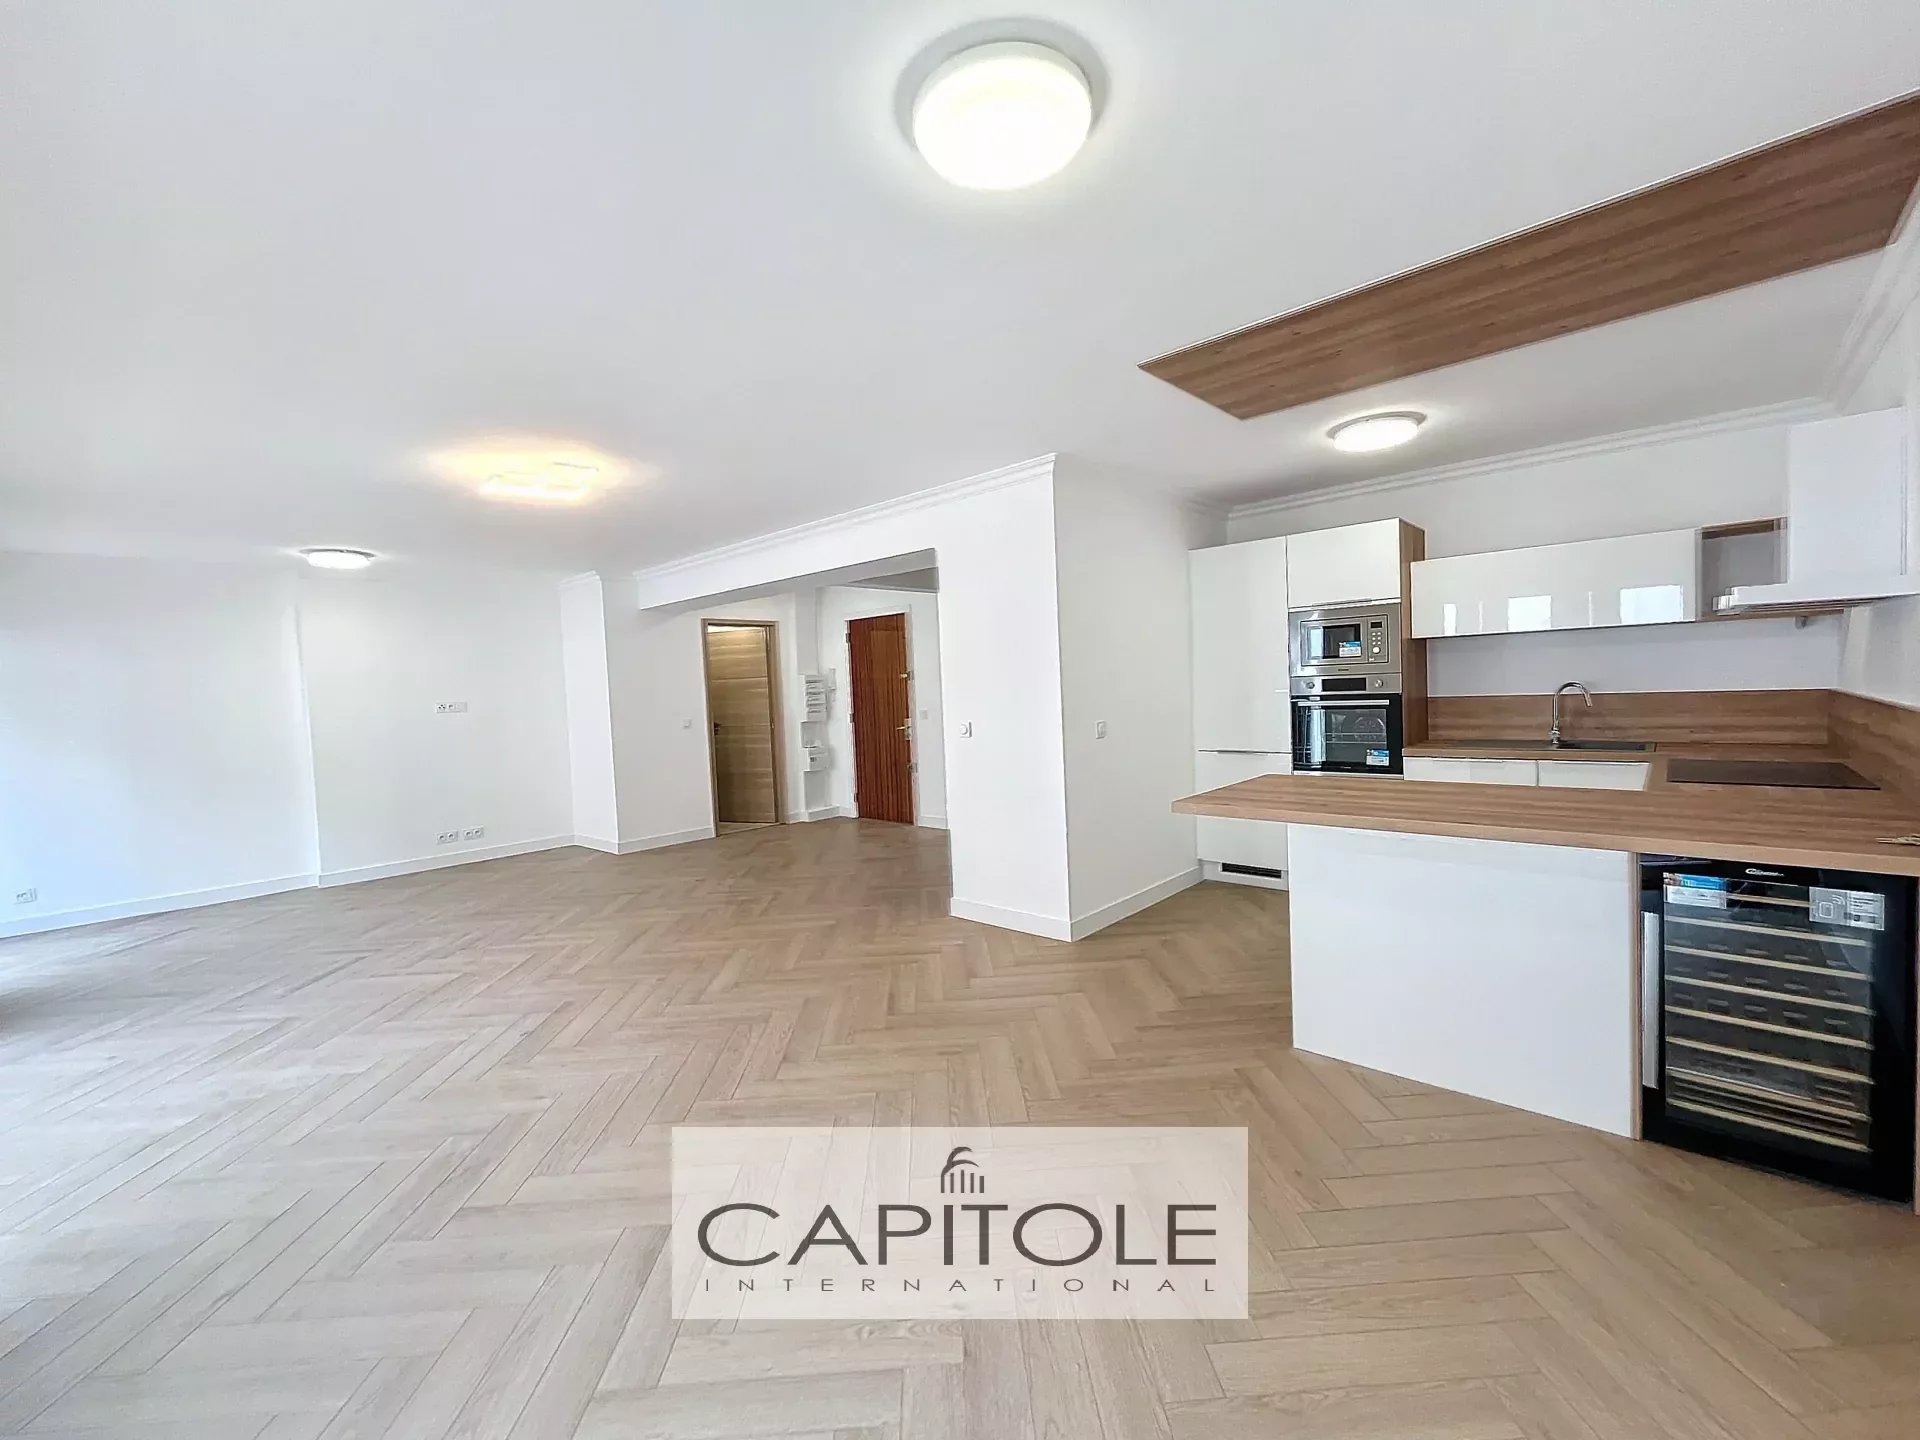 Antibes - City Center, 3-bedroom apartment, fully renovated, with cellar and garage.